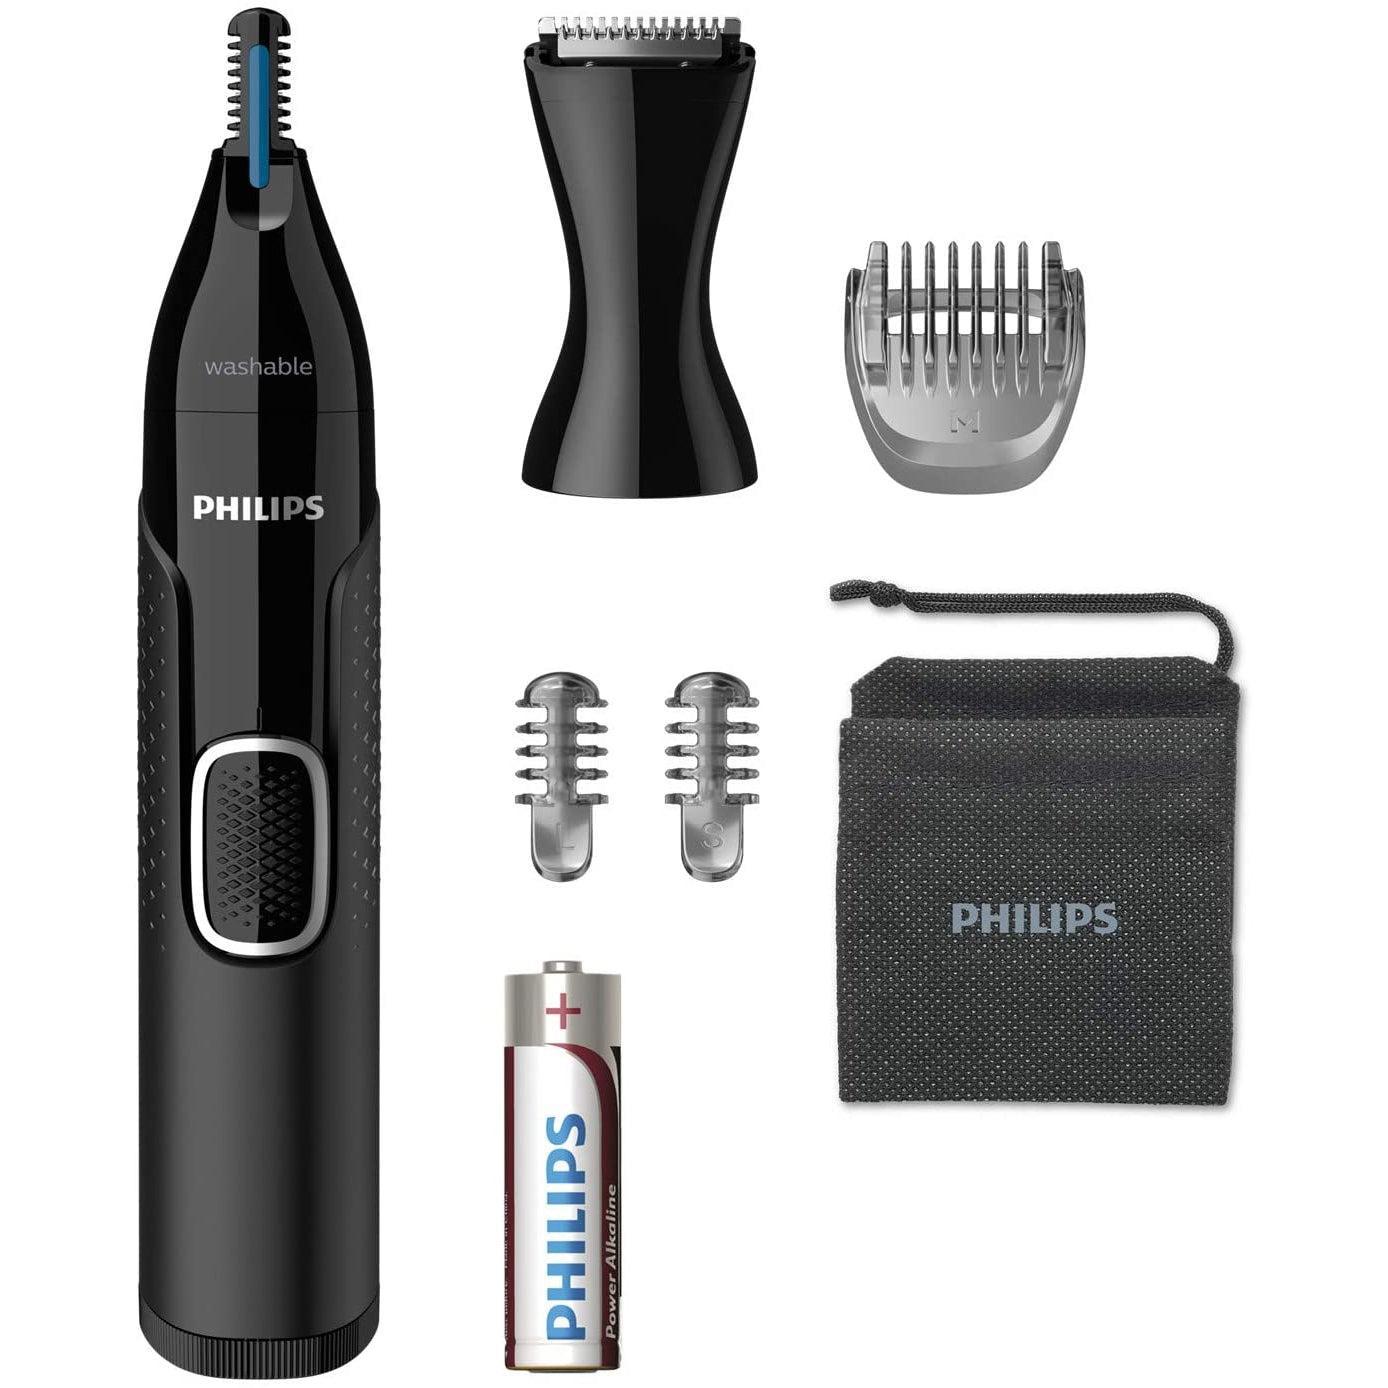 Philips NT5650/16 Series 5000 Waterproof Nose and Ear Trimmer with Precision Trimmer